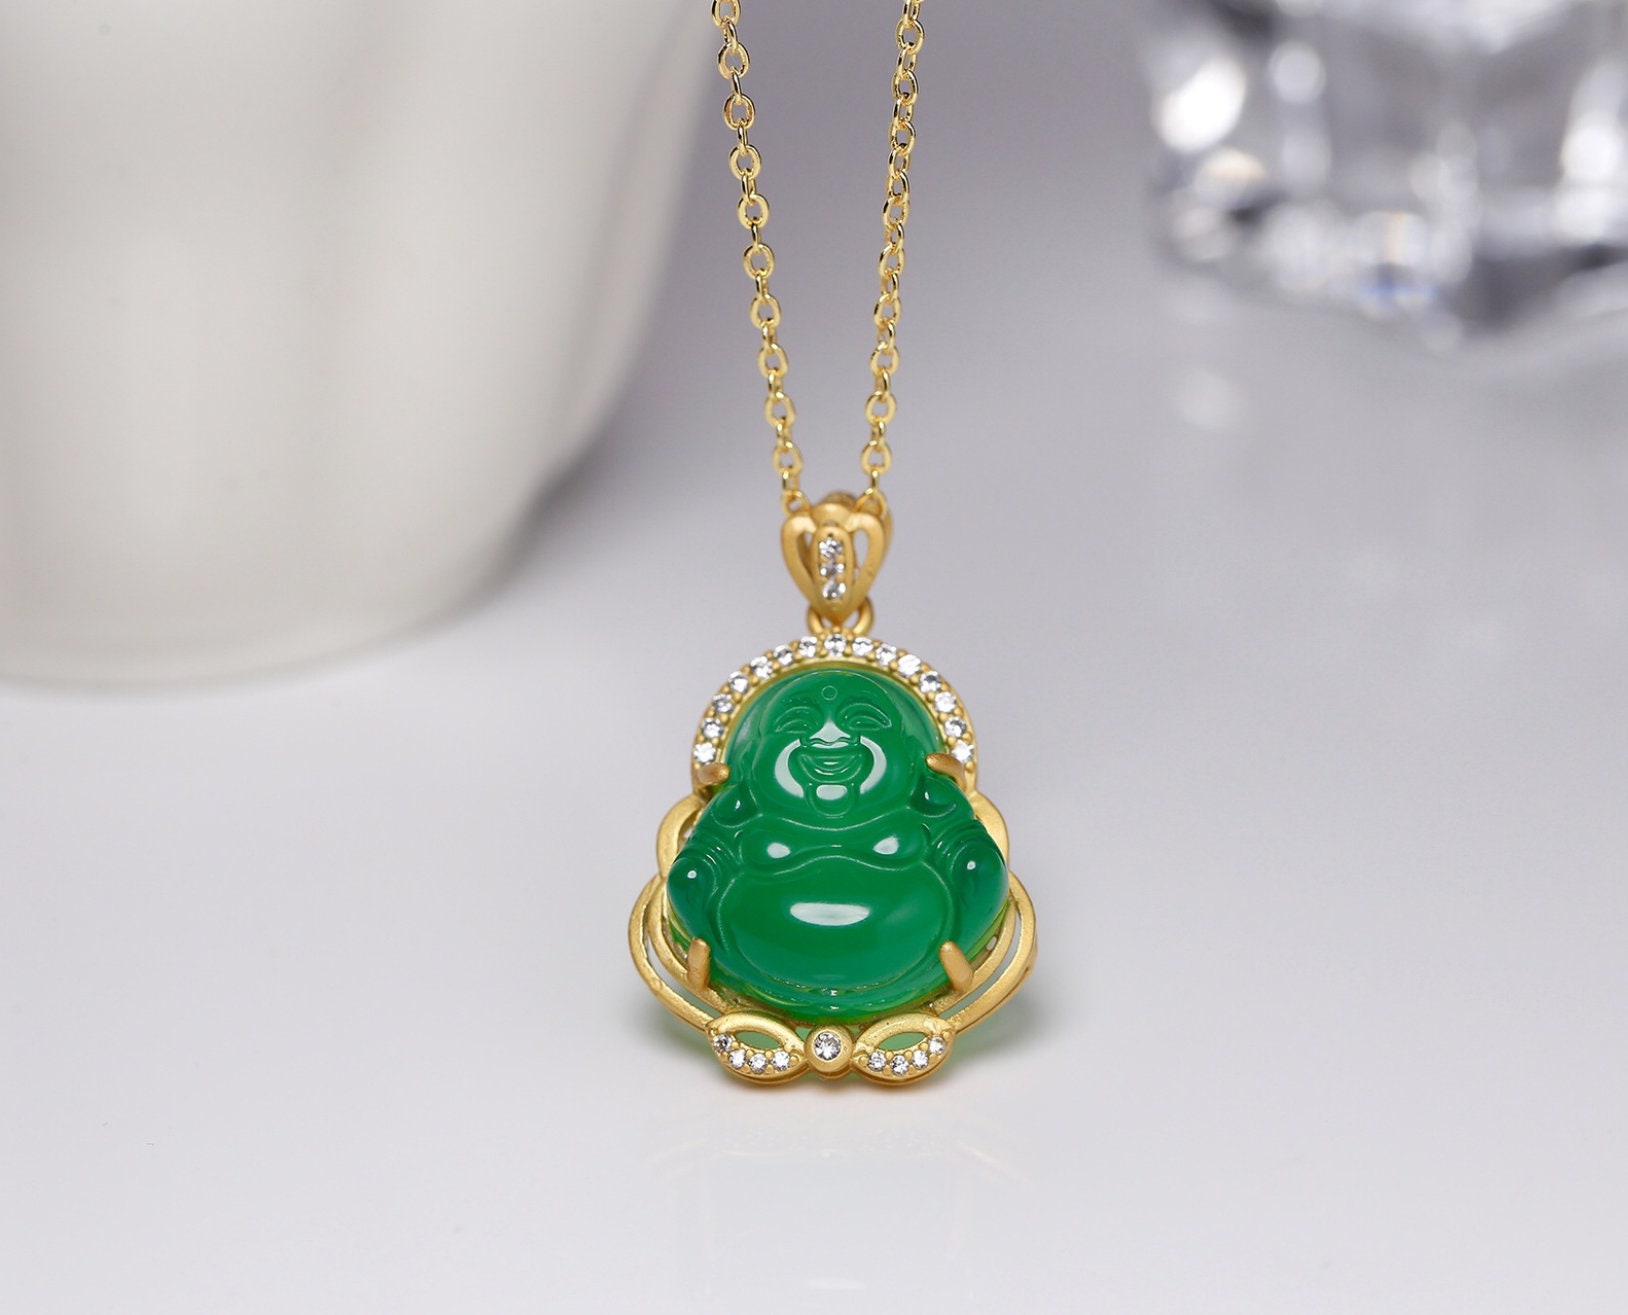 Buddha Pendant Necklace Hip Hop Punk Jewelry With Stainless Steel Chain And  Green Jades Stone For Women And Men From Value111, $11.12 | DHgate.Com